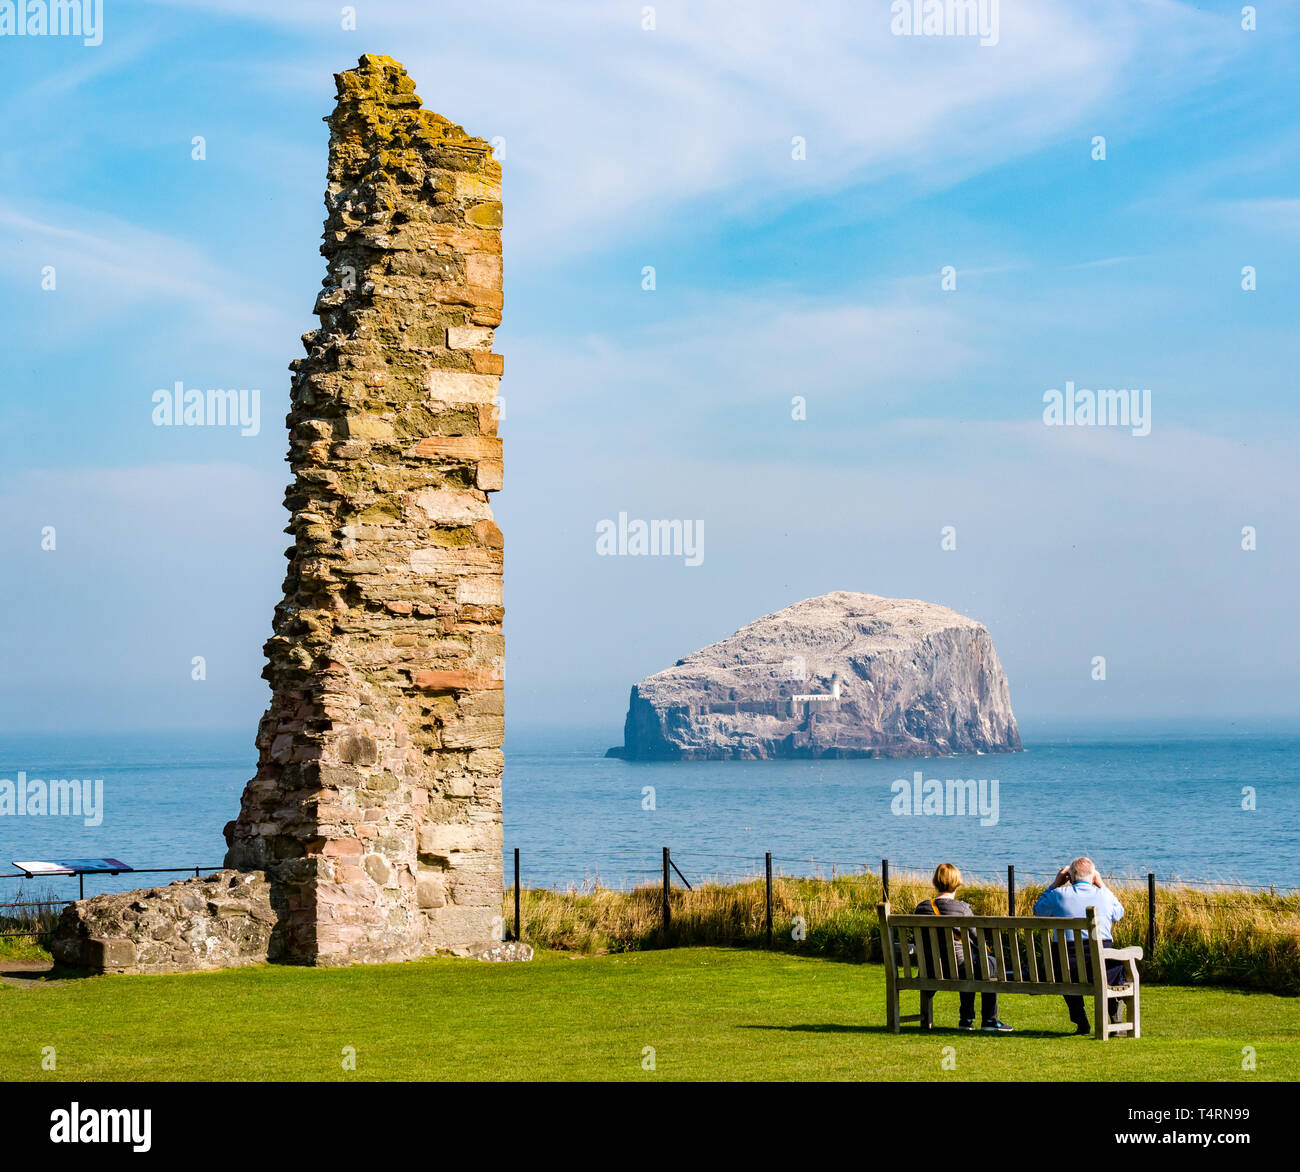 Tantallon Castle, North Berwick, East Lothian, Scotland, United Kingdom, 19th April 2019. UK Weather: Historic Environment Scotland's ruined 14th century castle. The ruined castle with a view of the largest Northern gannet colony on the Bass Rock in the Firth of Forth. The gannets are reuniting and building nests. A couple with binoculars sit on a bench to watch the seabirds Stock Photo